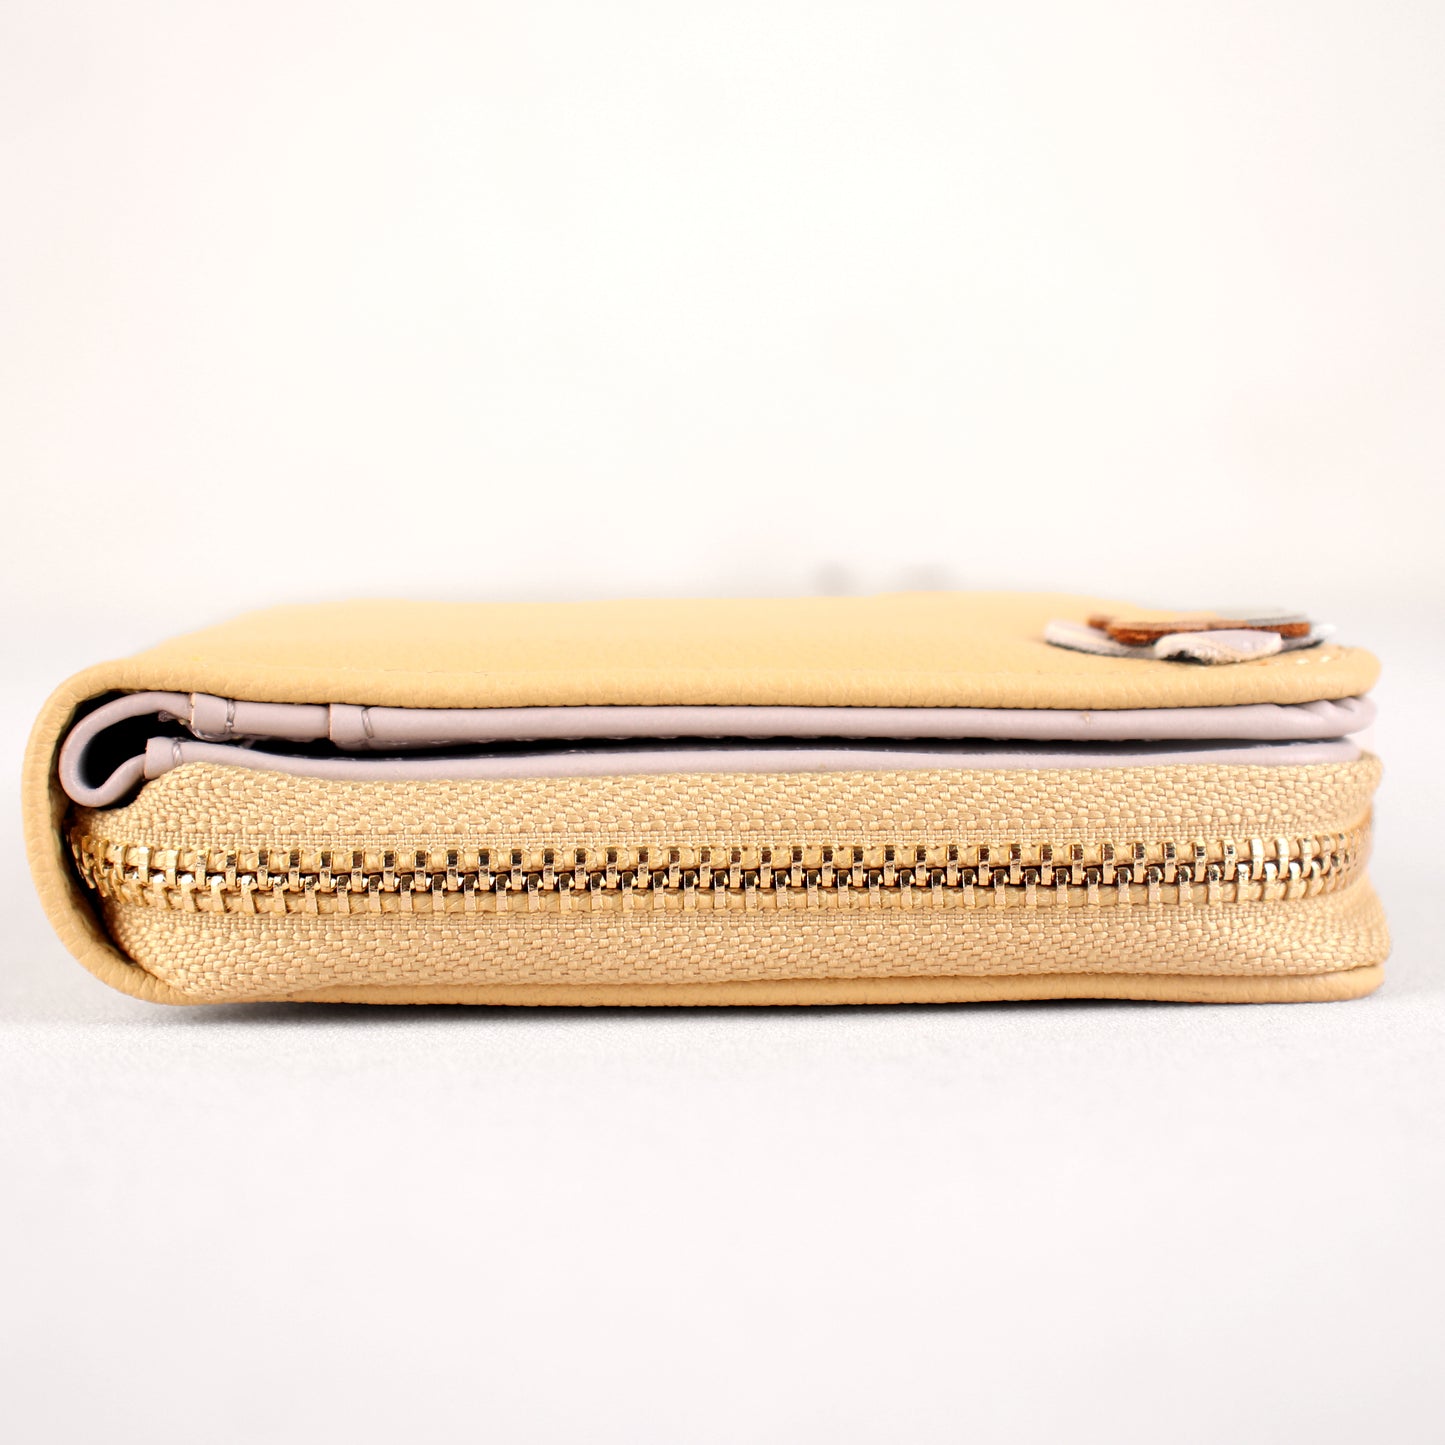 The Exquisite Signature Wallet in Pale Tone